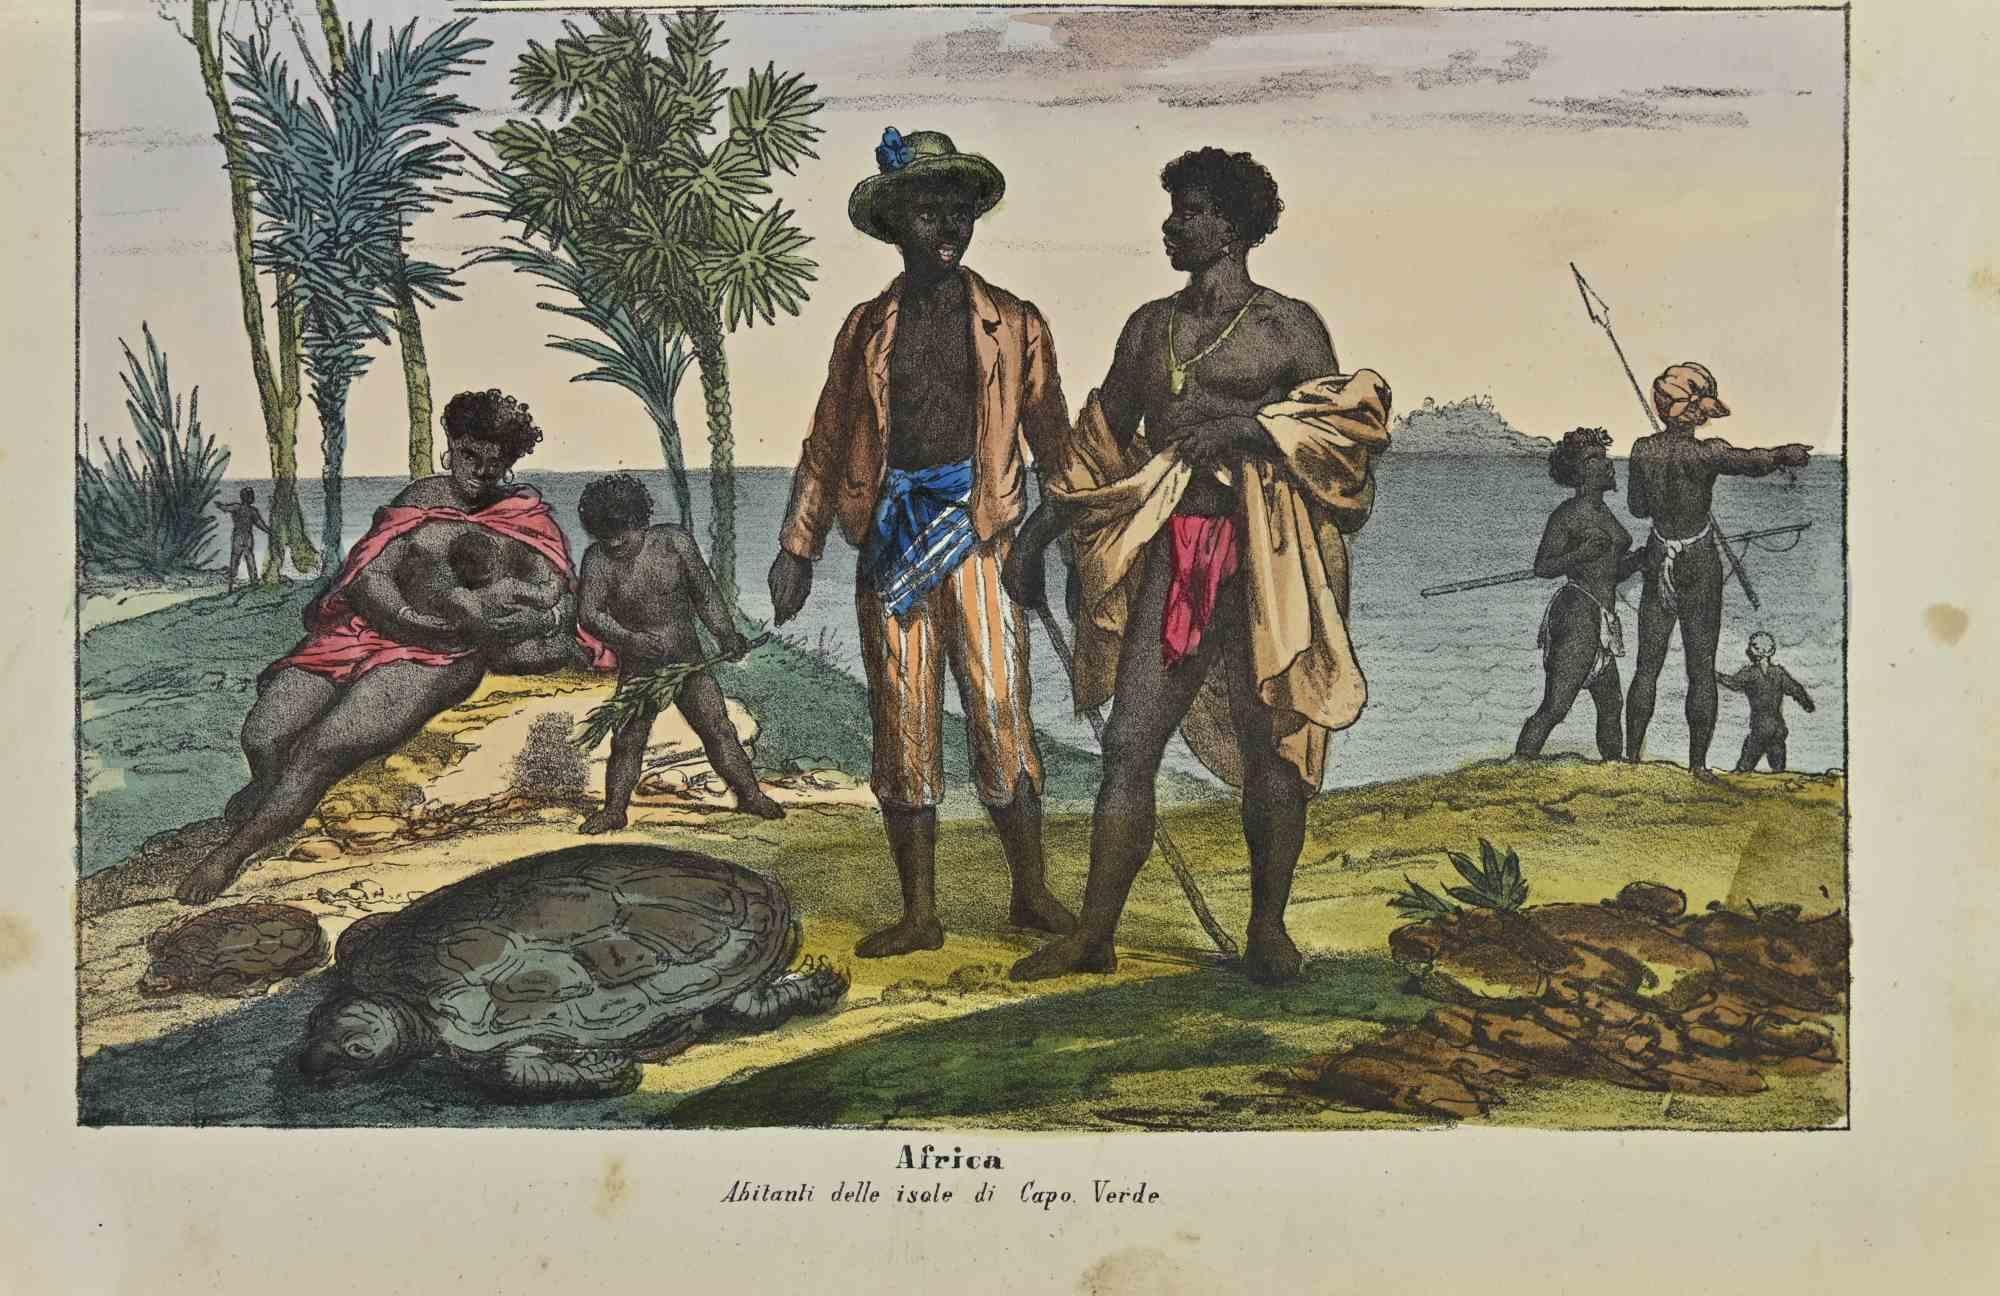 Ancient African Customs - Lithograph by Auguste Wahlen - 1844